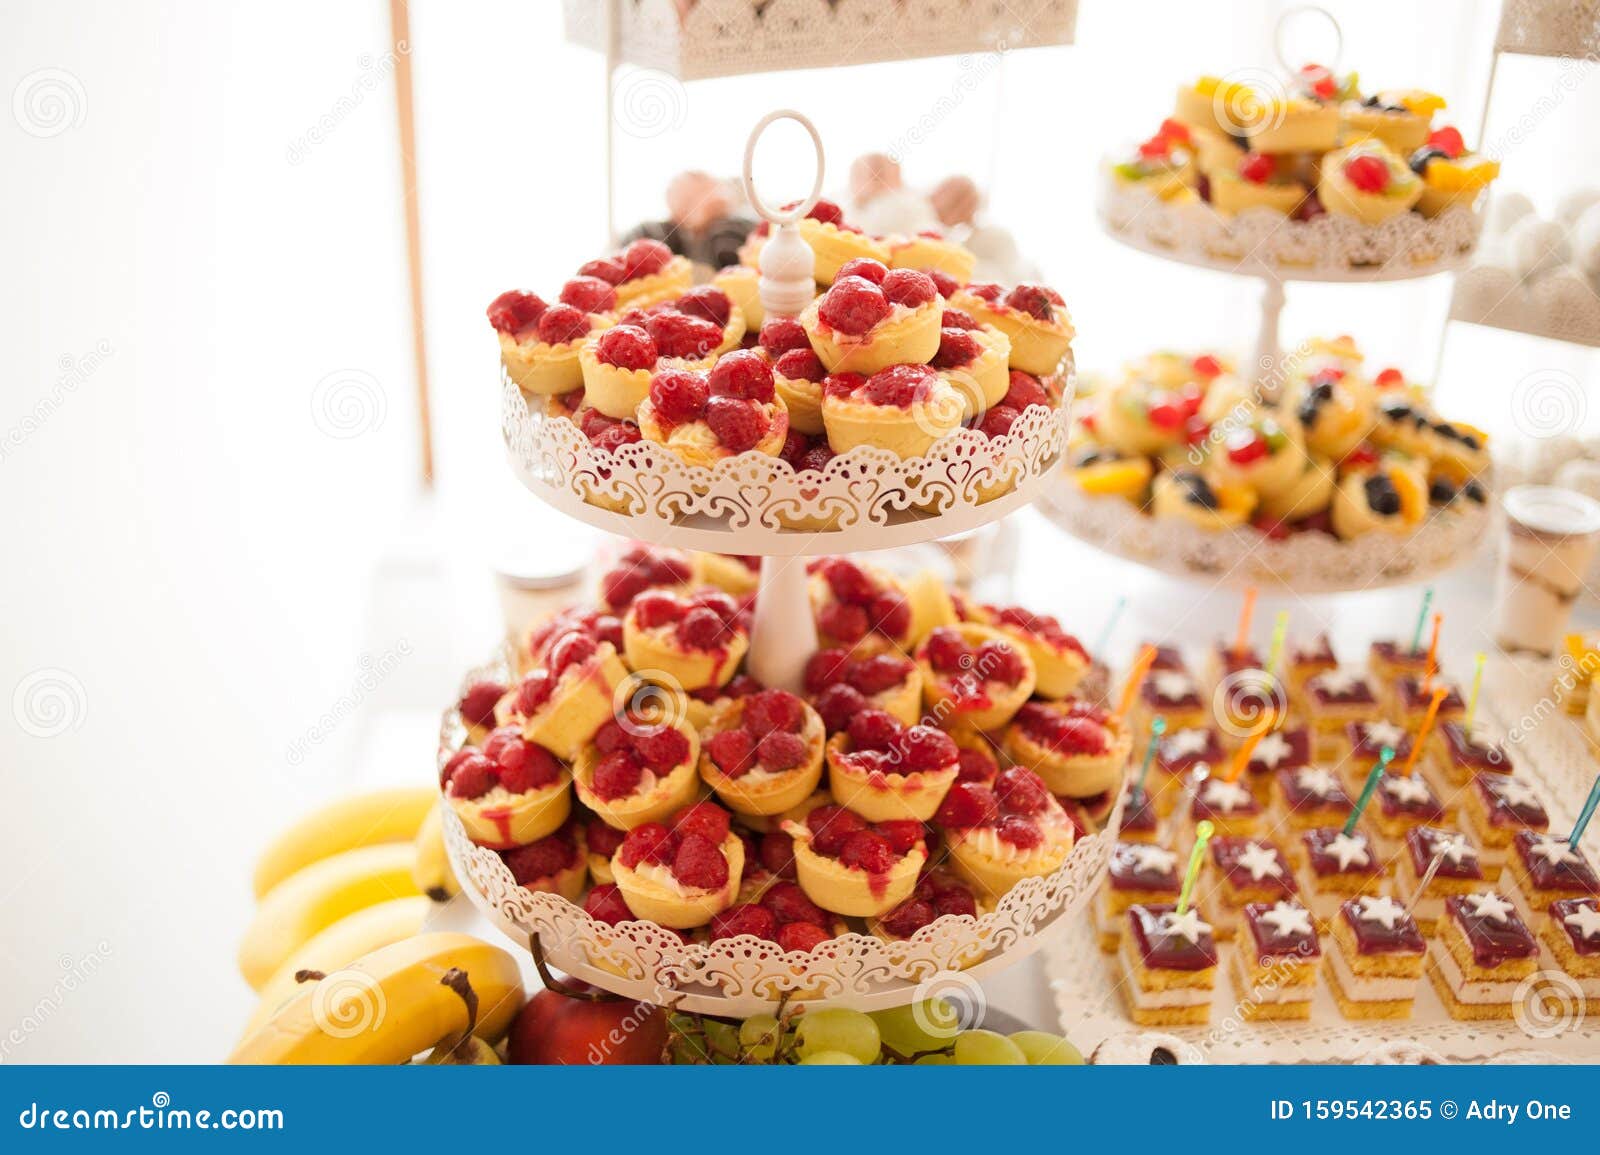 sweet candy bar.different delicious fruits and cakes on wedding reception table .